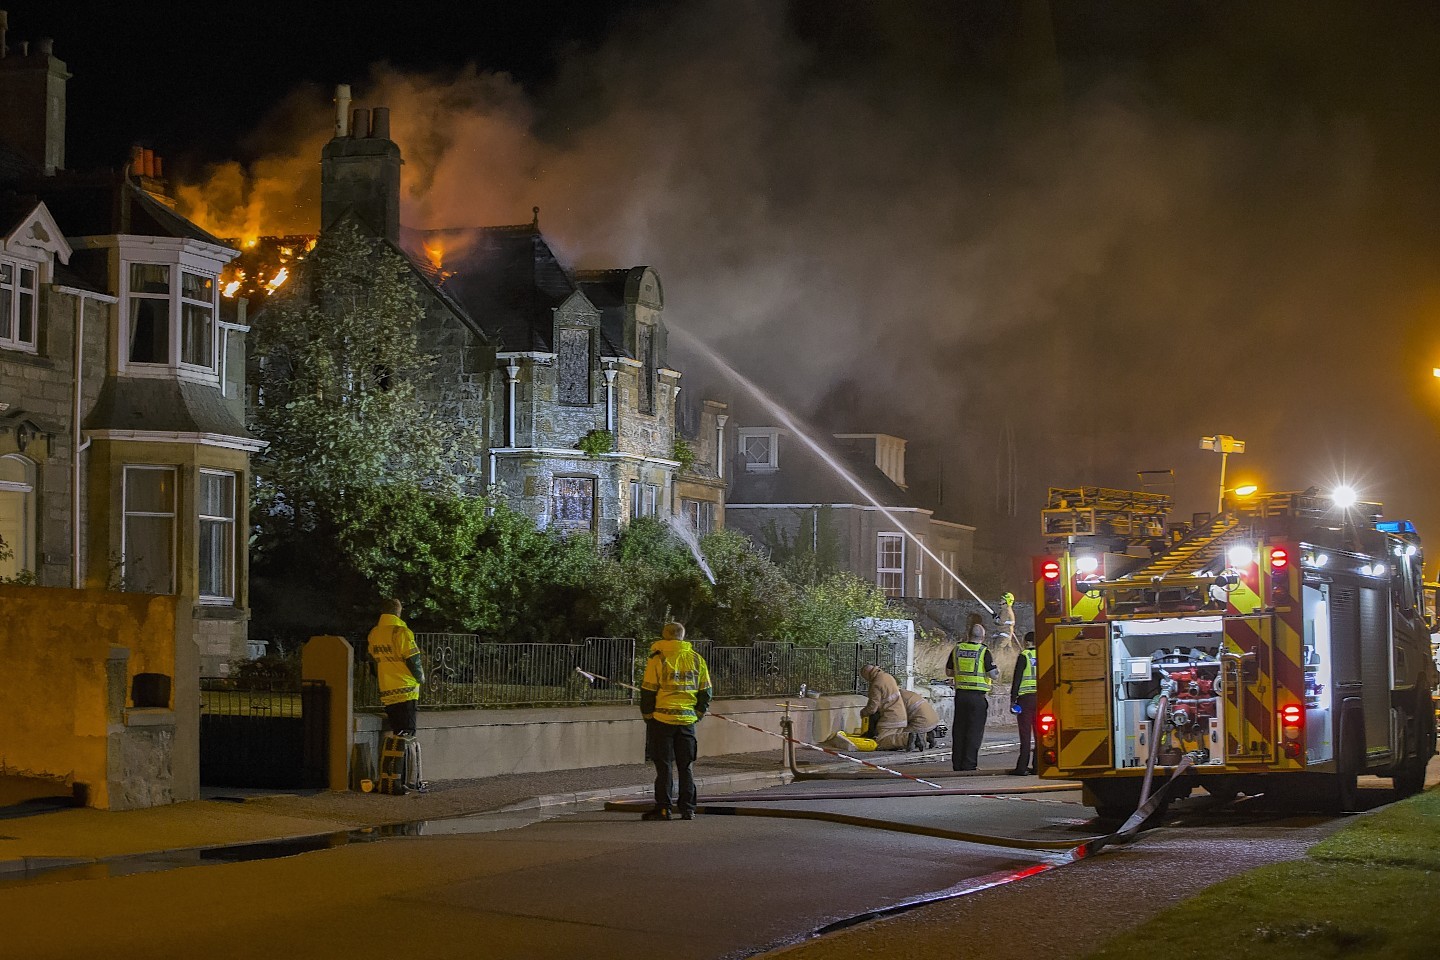 Firefighters are battling a "well-established" fire in Moray